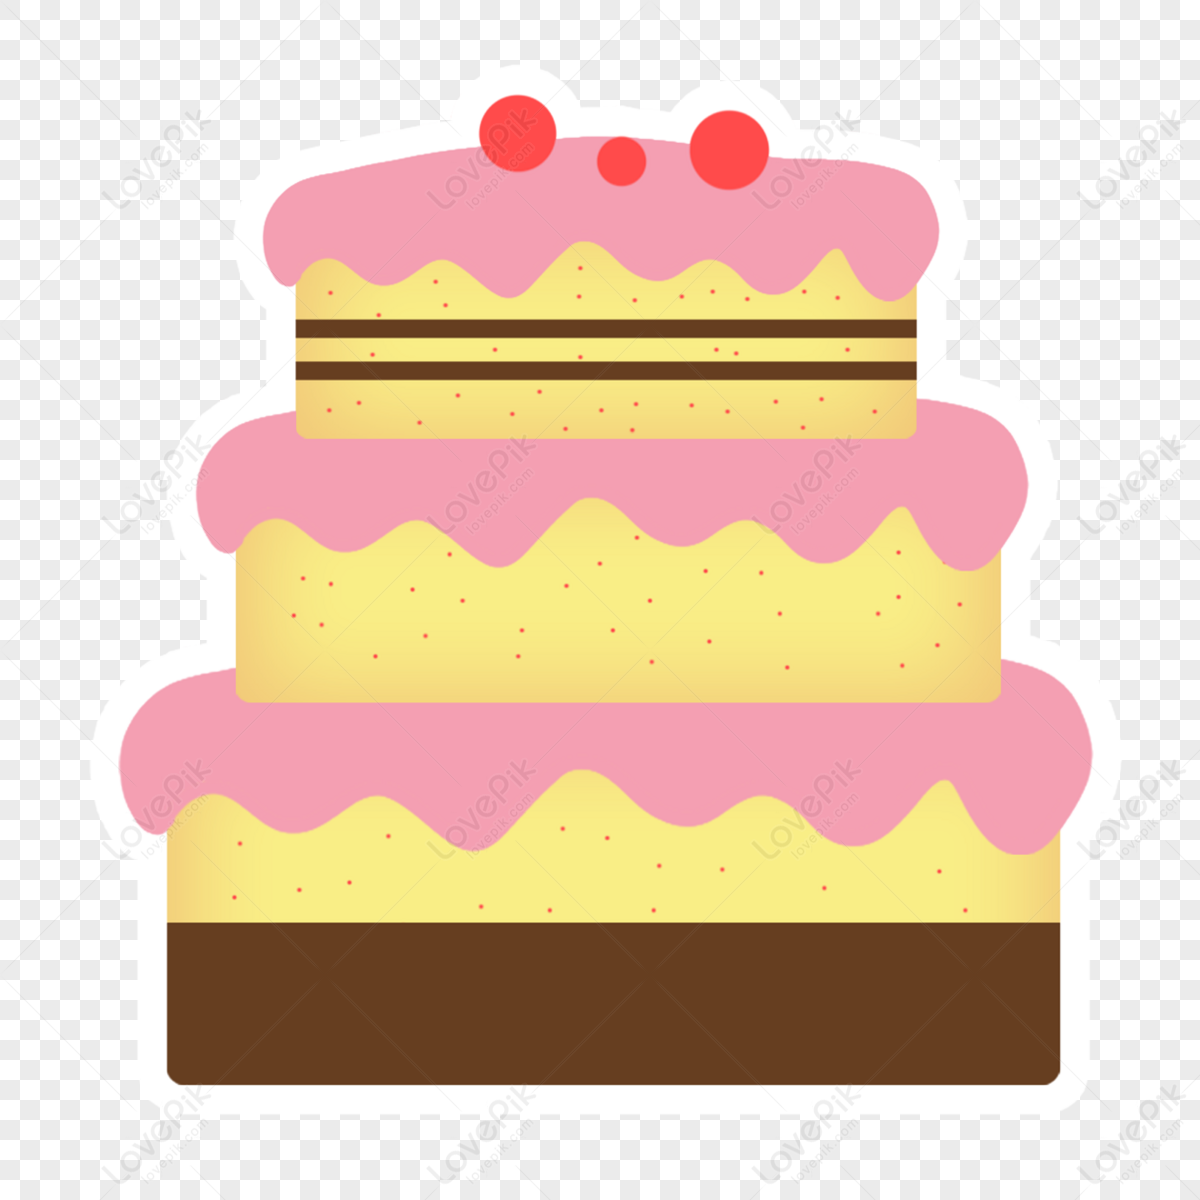 Tiered Cake Stock Vector Illustration and Royalty Free Tiered Cake Clipart